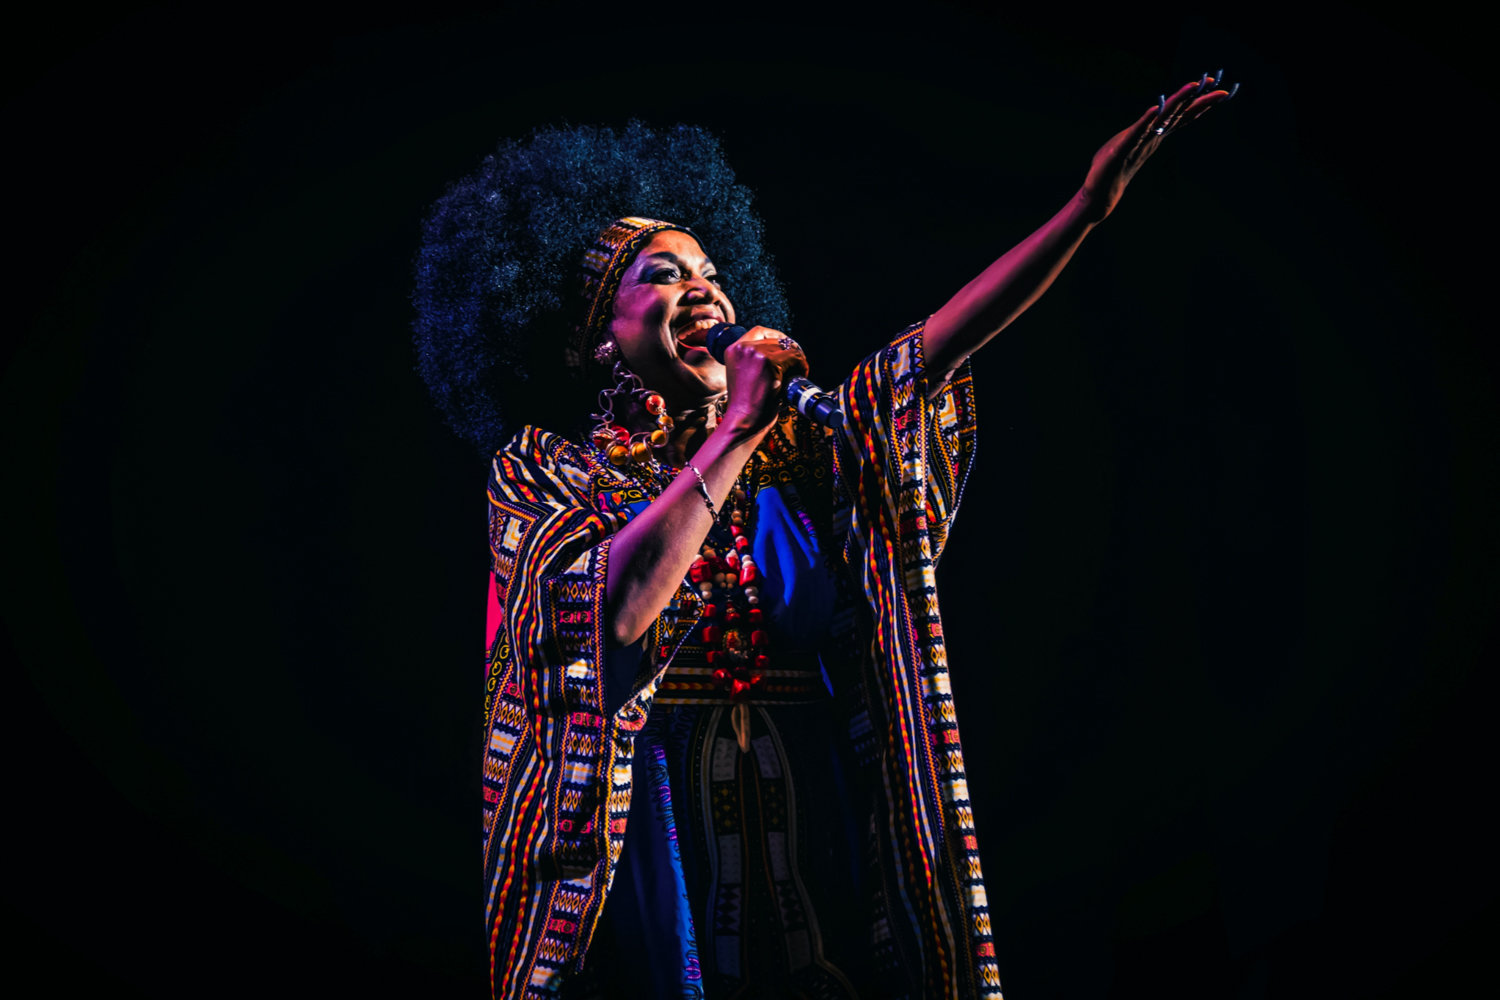 'Celia Cruz: The Musical' tells the story of the life and music of the late Cuban singer, and will stop by the Lehman Center for the Performing Arts on Nov. 16.